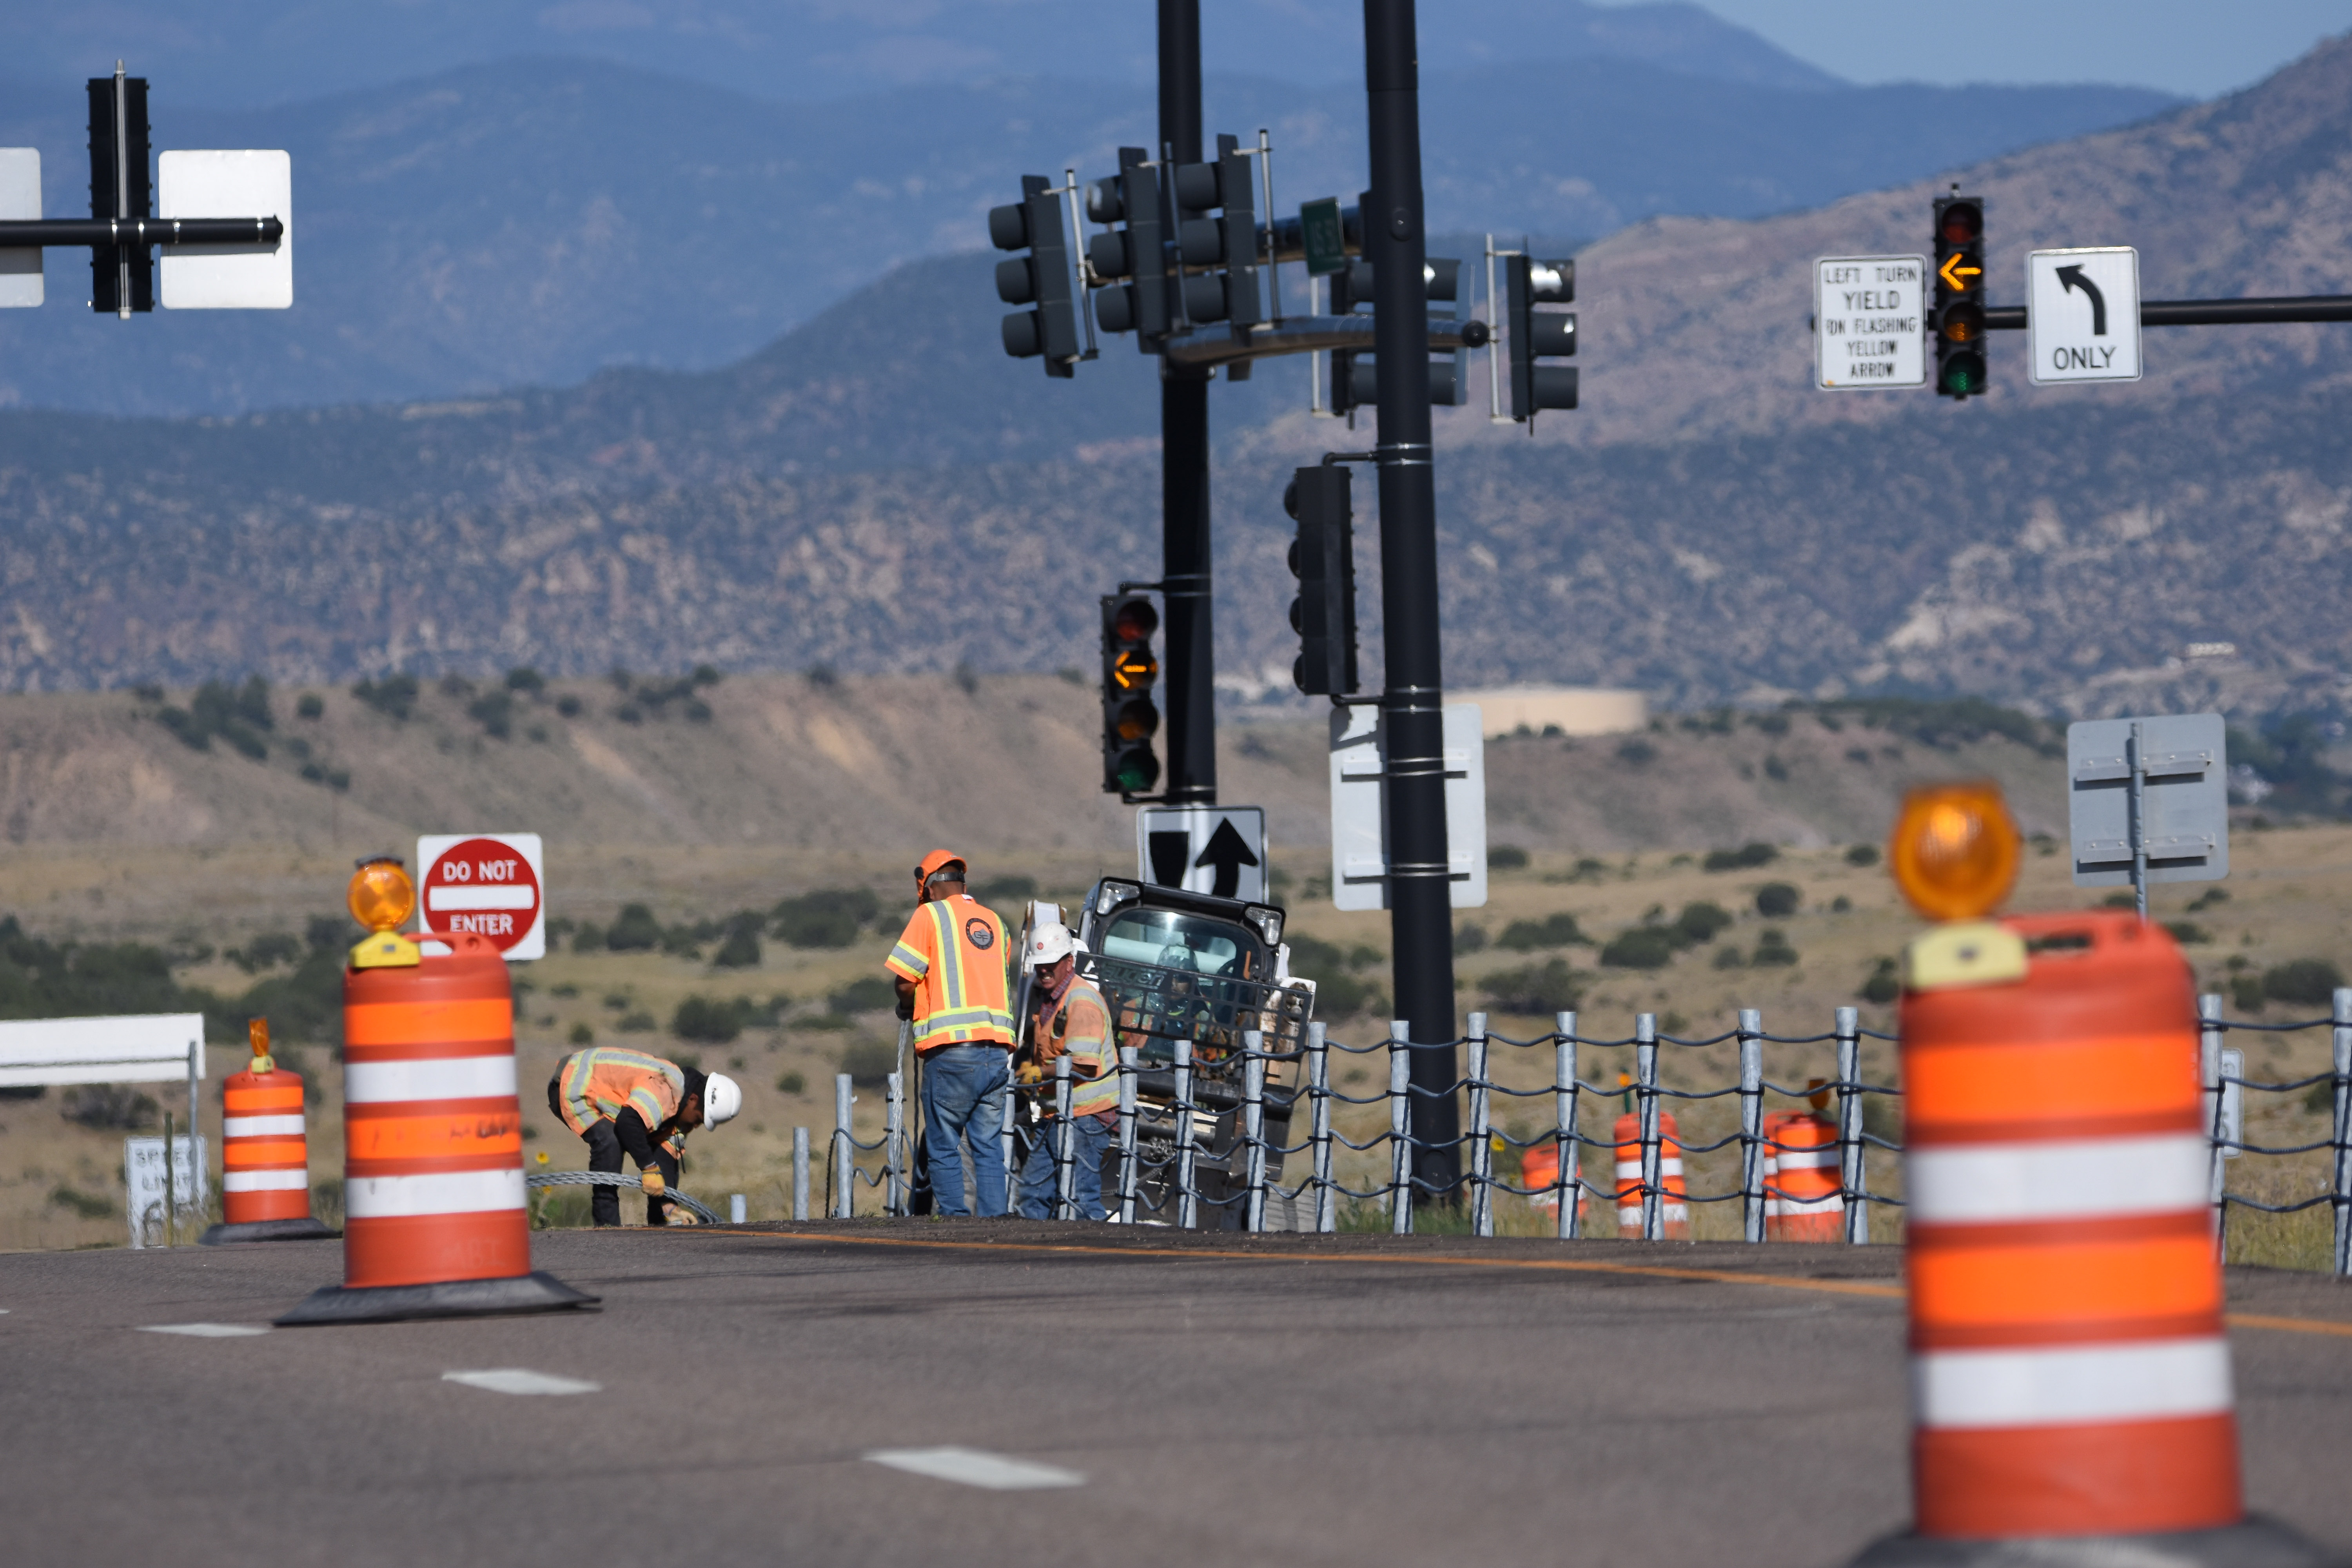 crews installing new cable rail on US 50.jpg detail image